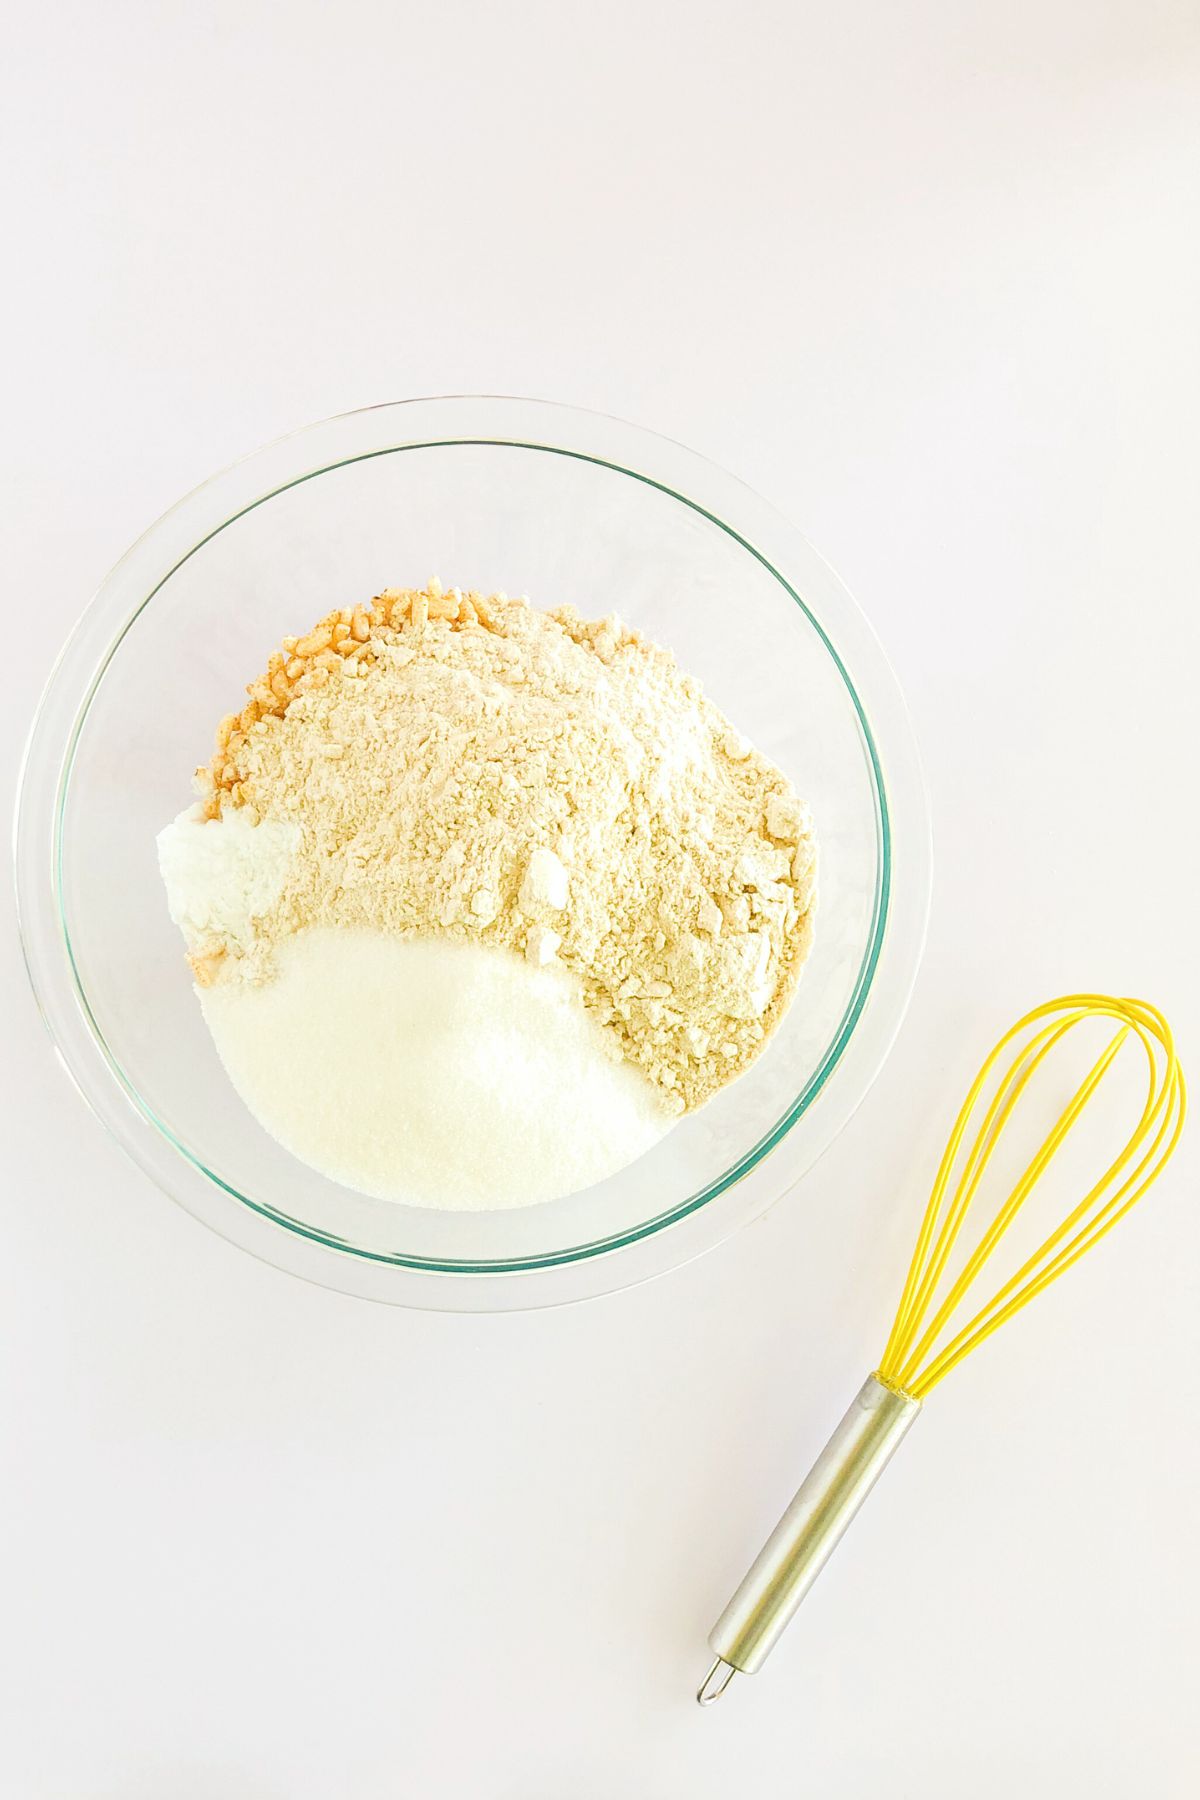 whole wheat pastry flour and puffed rice cereal in a glass bowl with a yellow spatula